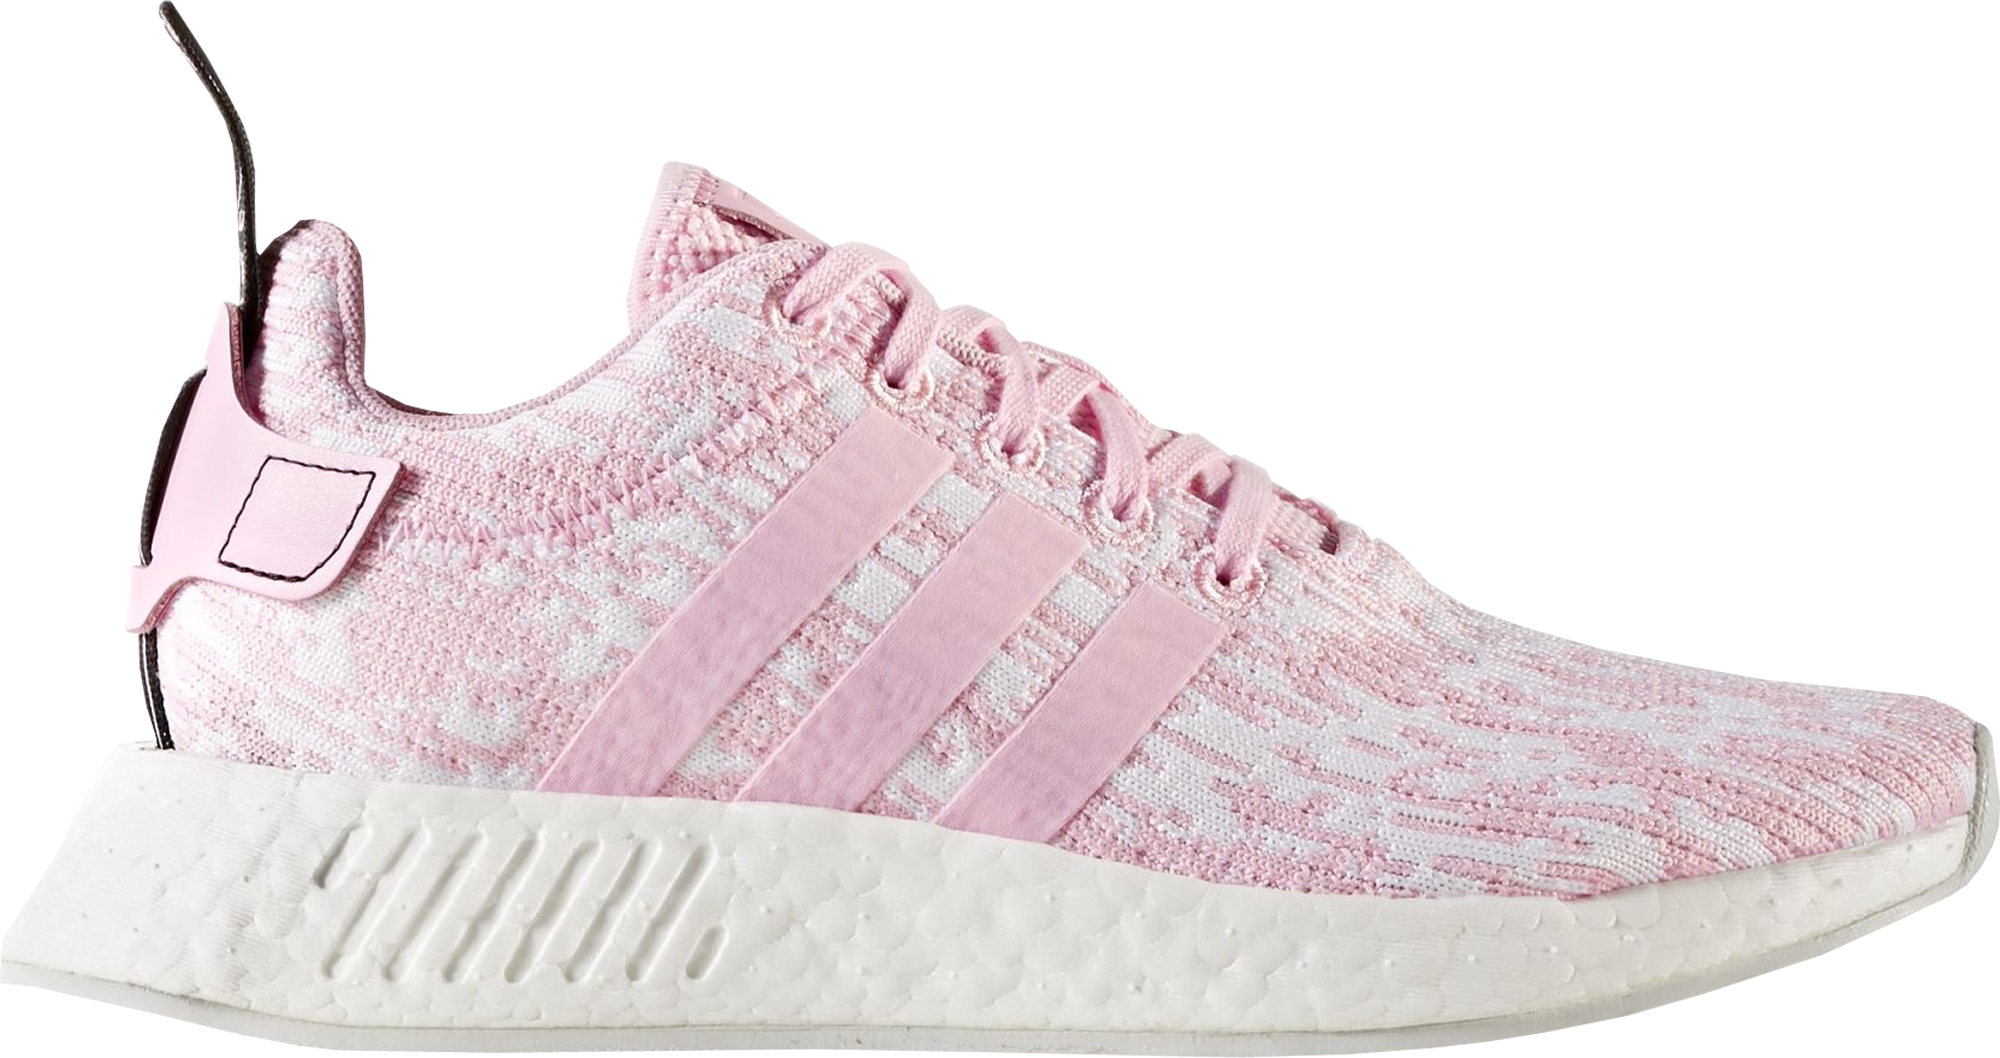 white nmds with pink